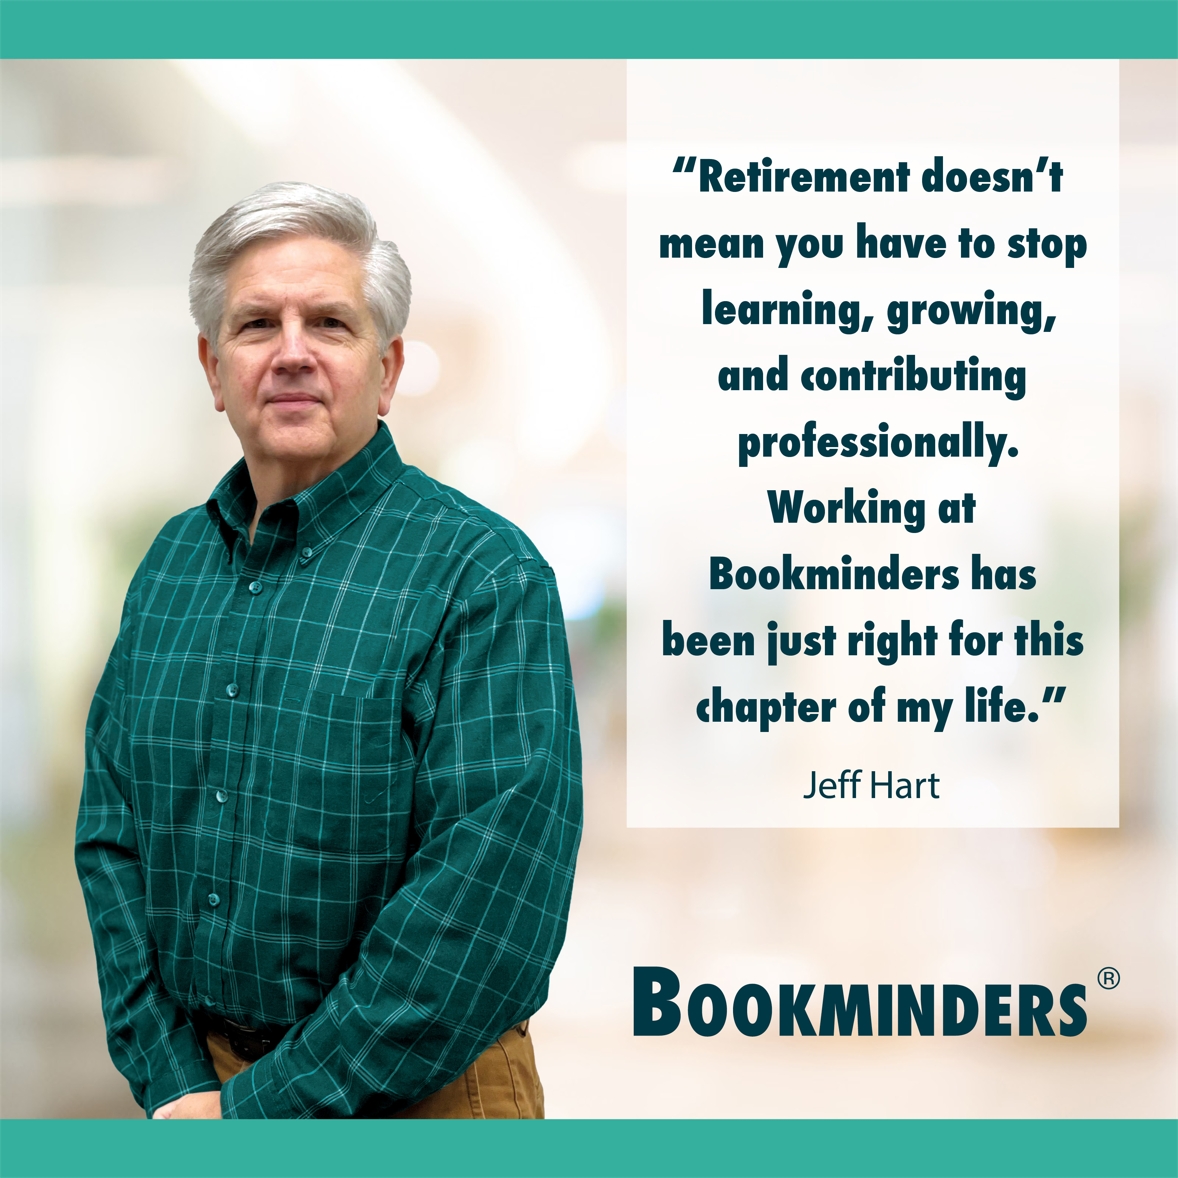 Retirement doesn't mean you have to stop learning, growing, and contributing professionally. Working at Bookminders has been just right for this chapter of my life.